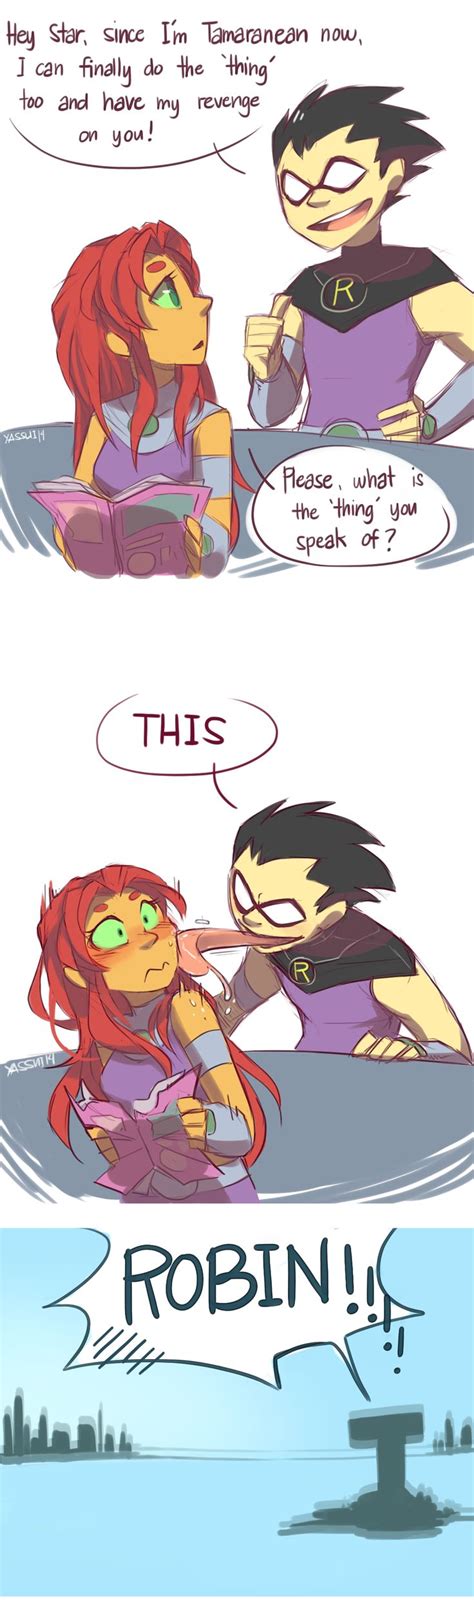 265 best images about teen titans on pinterest nightwing robins and teen titans funny